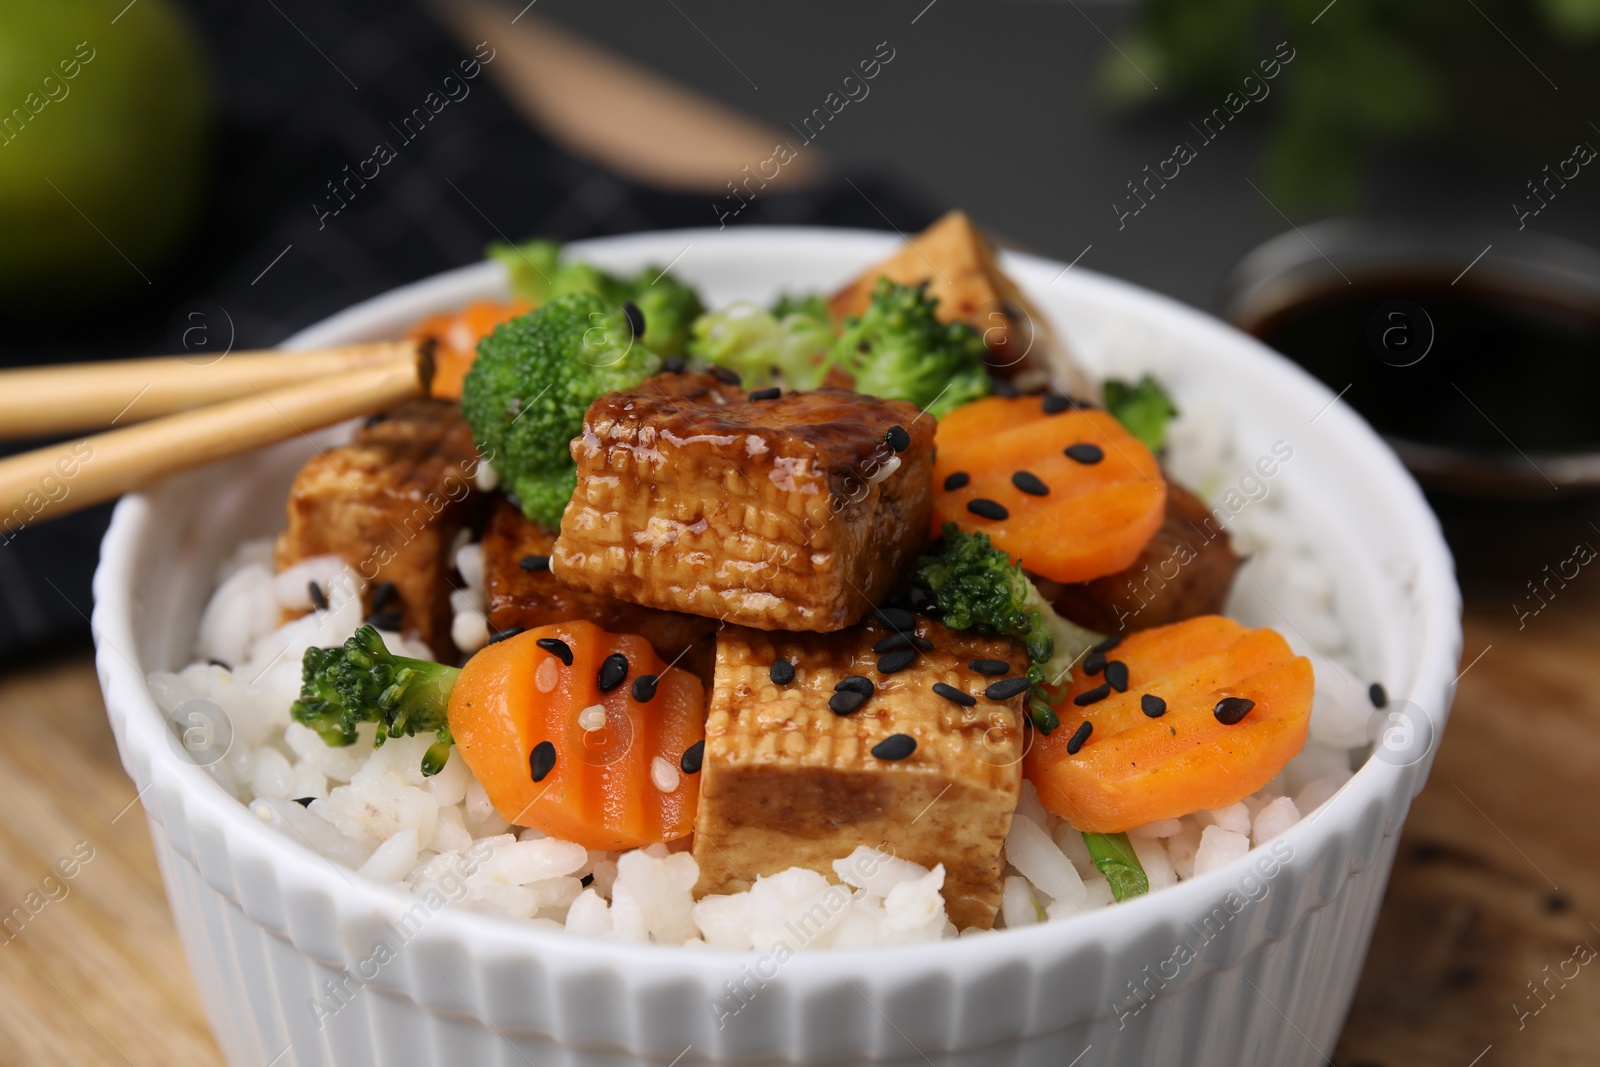 Photo of Bowl of rice with fried tofu, broccoli and carrots on wooden board, closeup